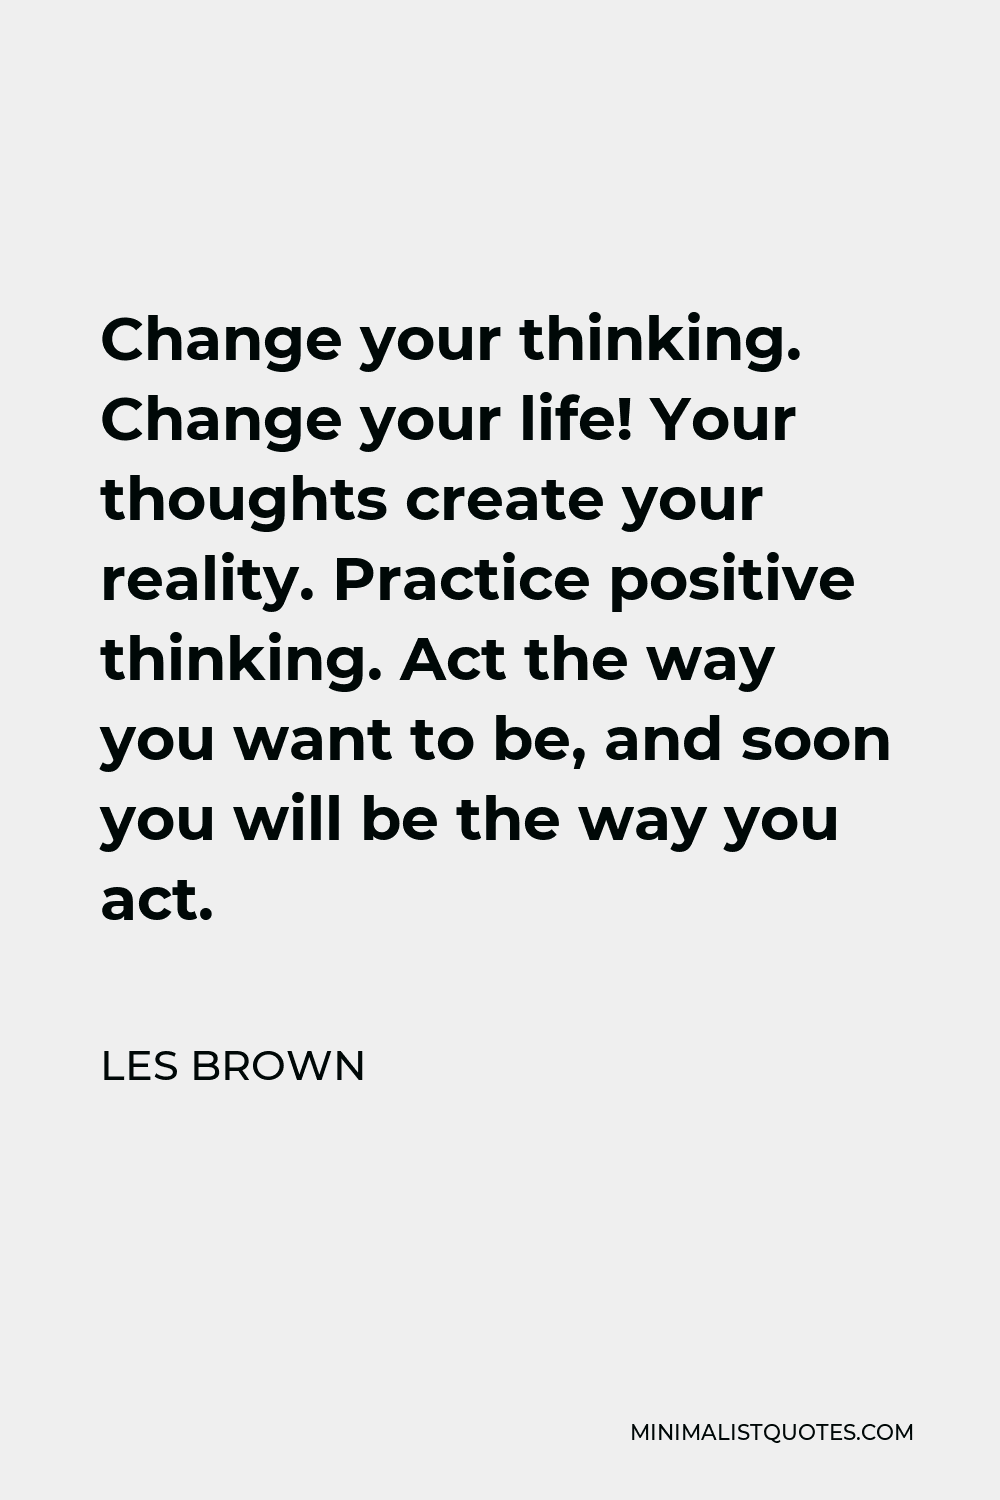 Les Brown Quote - Change your thinking. Change your life! Your thoughts create your reality. Practice positive thinking. Act the way you want to be, and soon you will be the way you act.